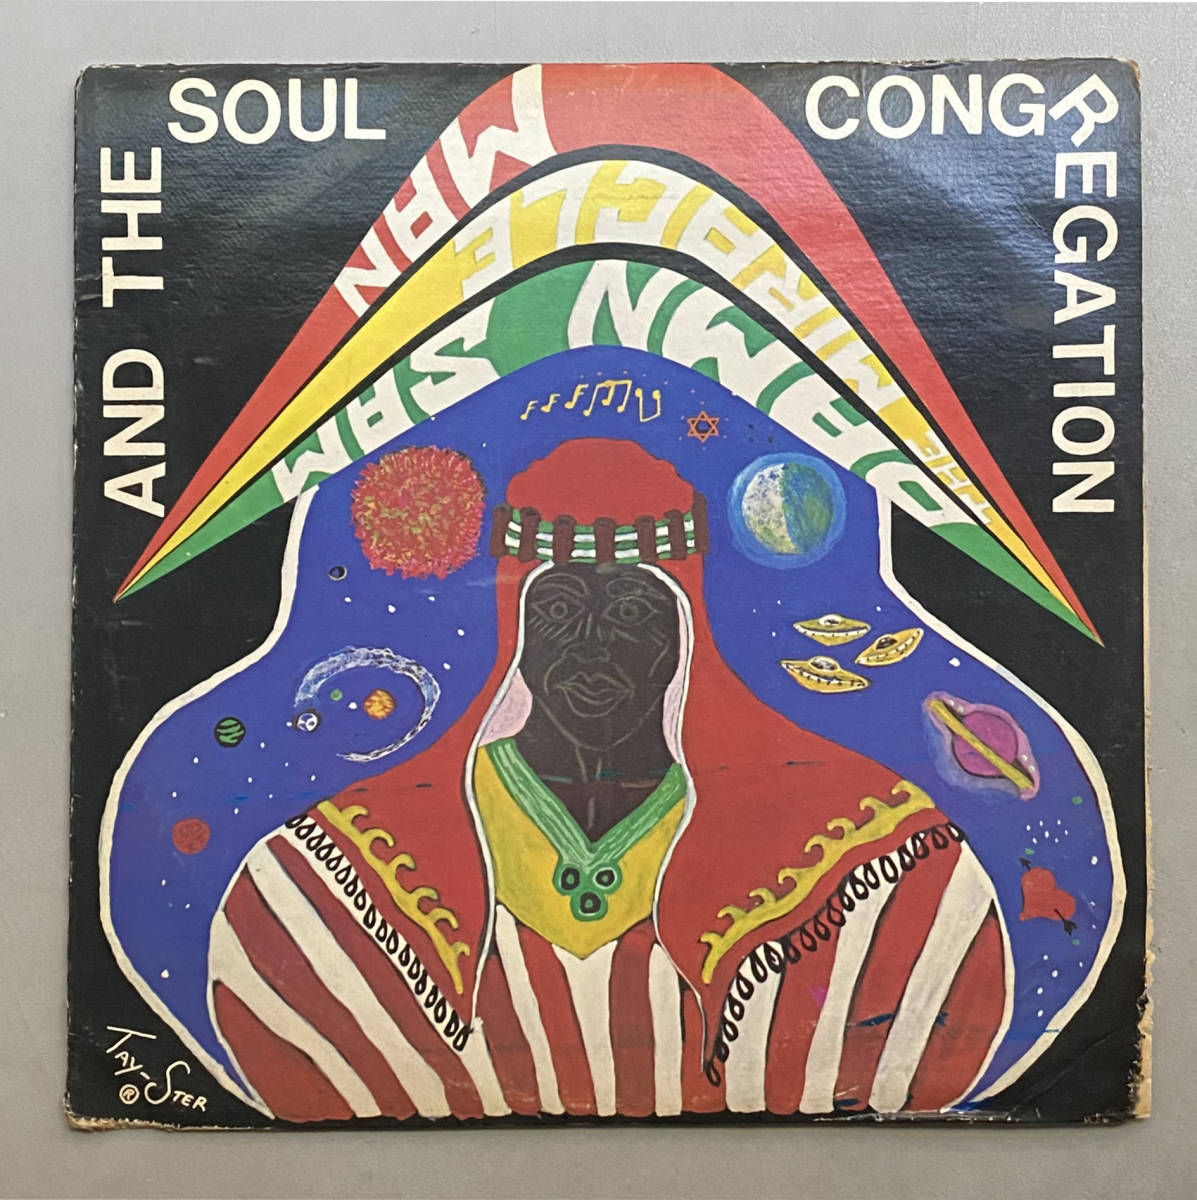 DAMN SAM THE MIRACLE MAN & THE SOUL CONGREGATION 